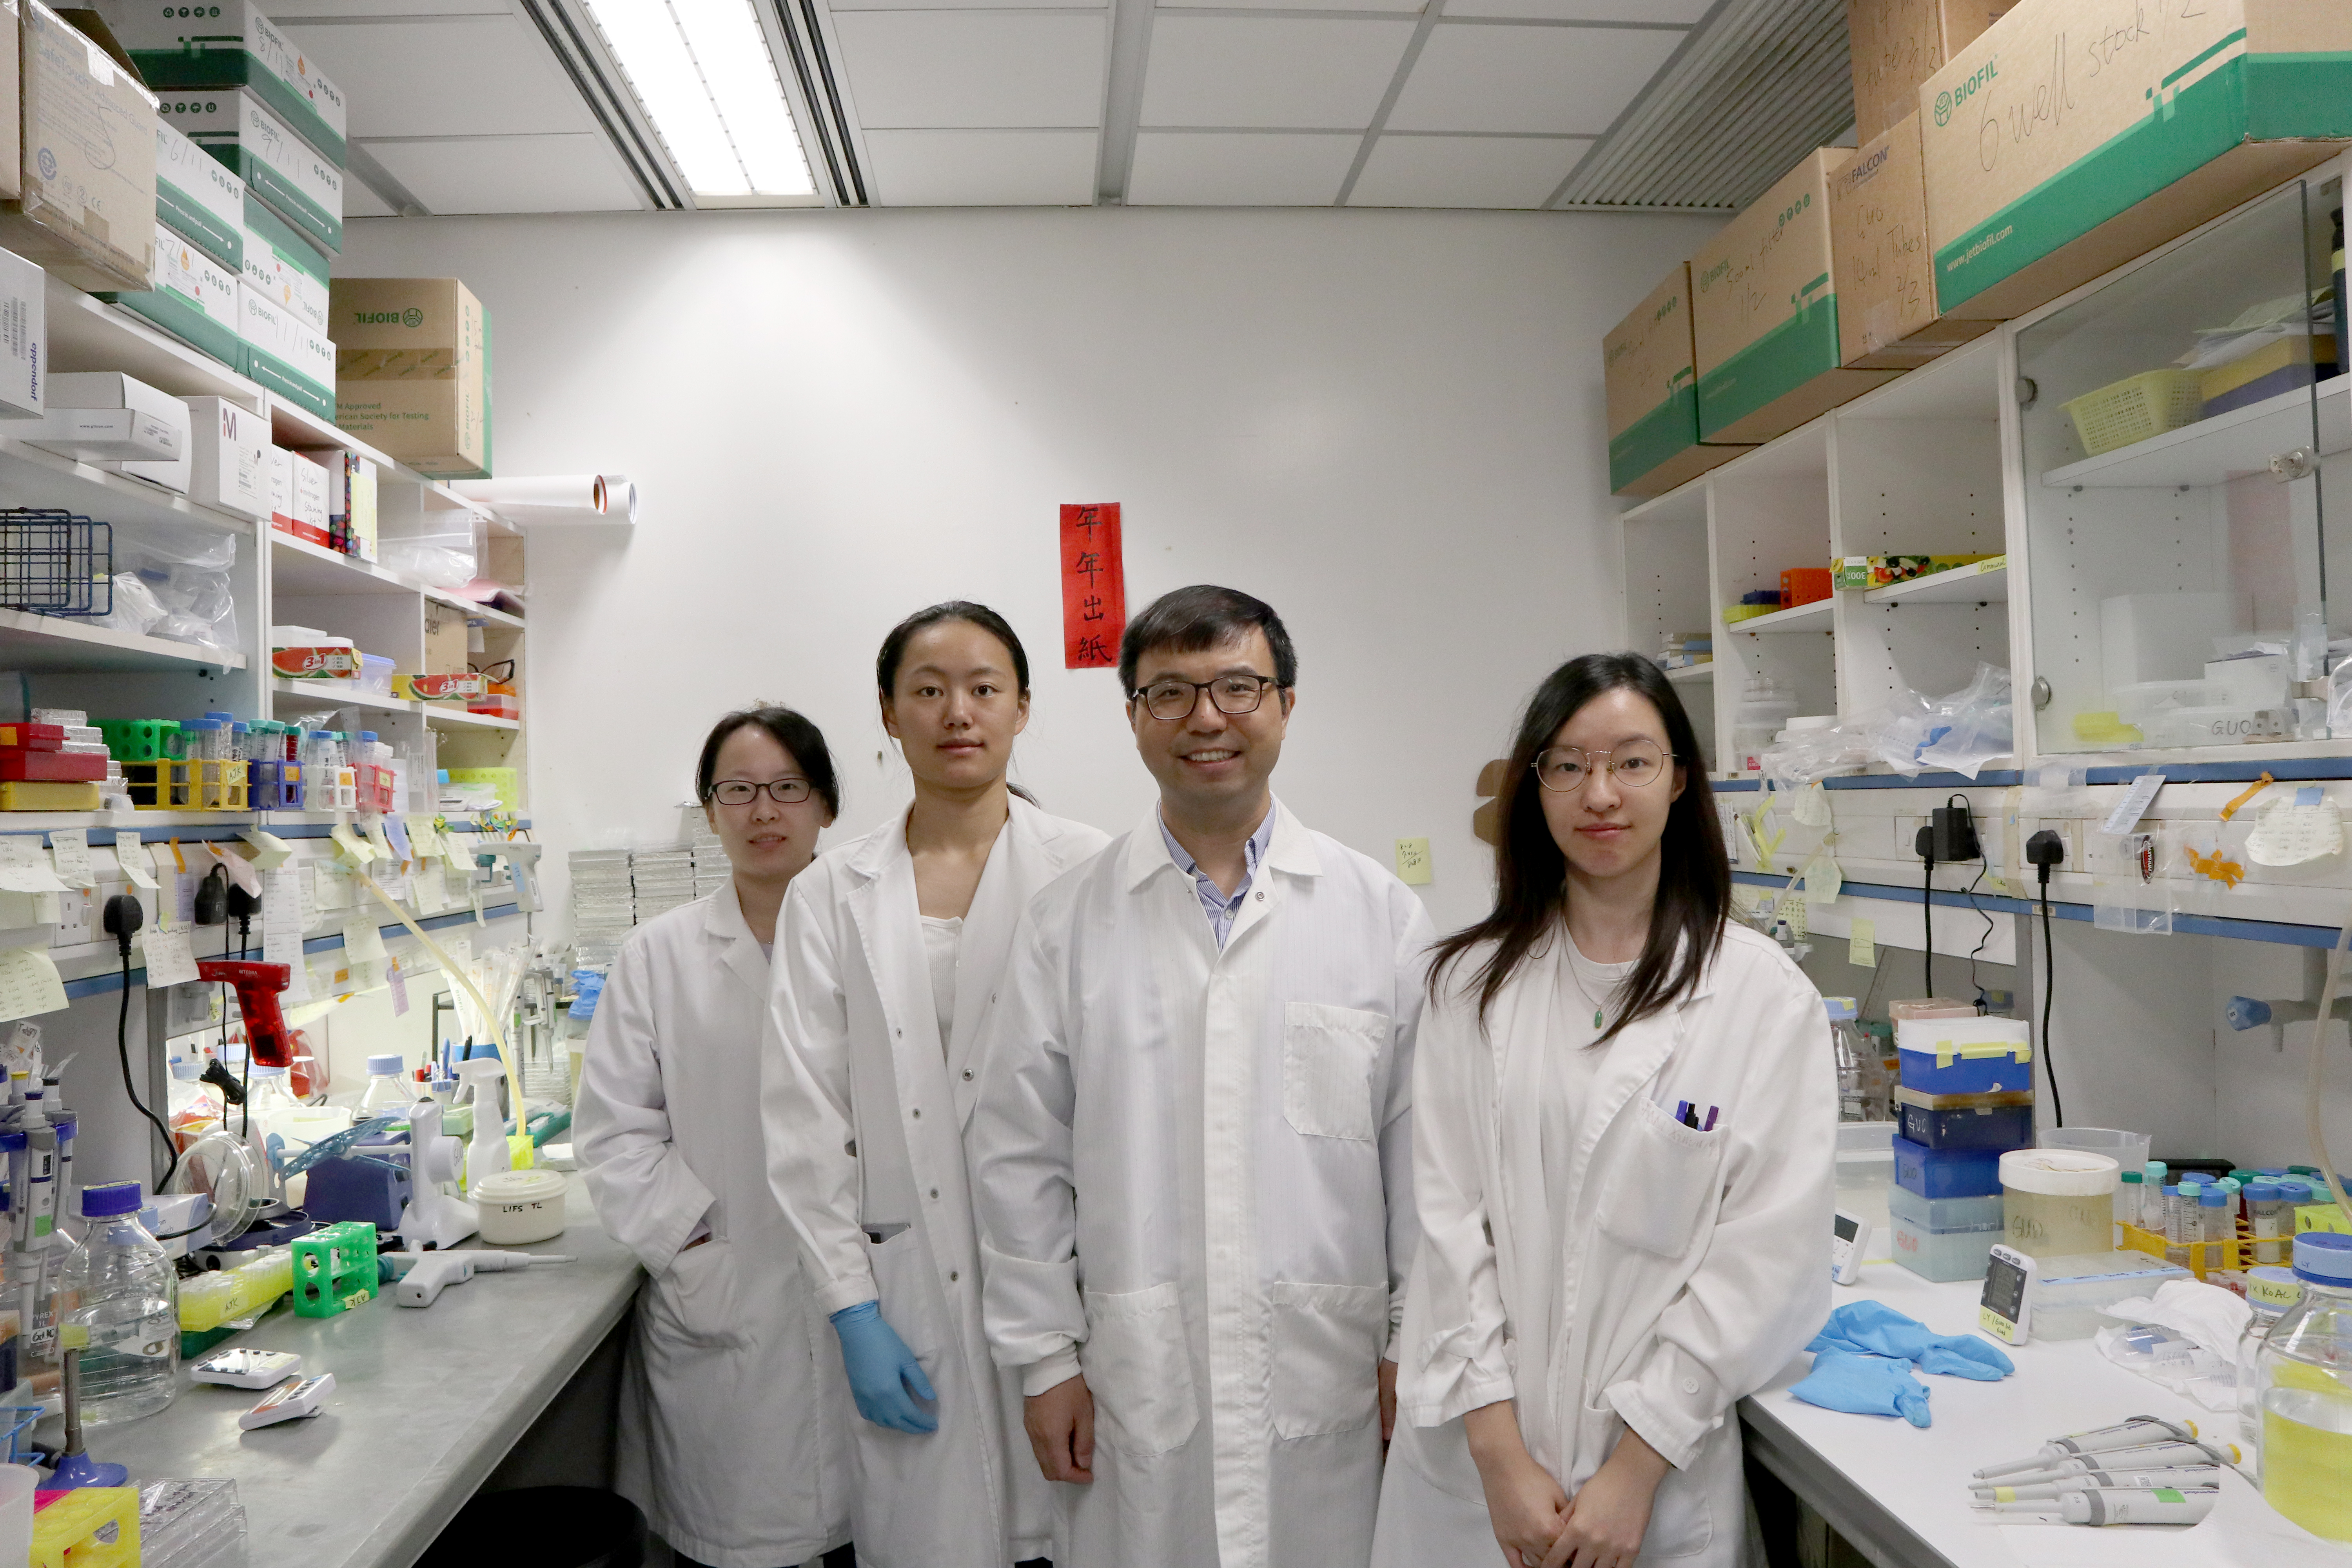 Prof. GUO Yusong (second right), Associate Professor in HKUST’s Division of Life Science, and his team members.